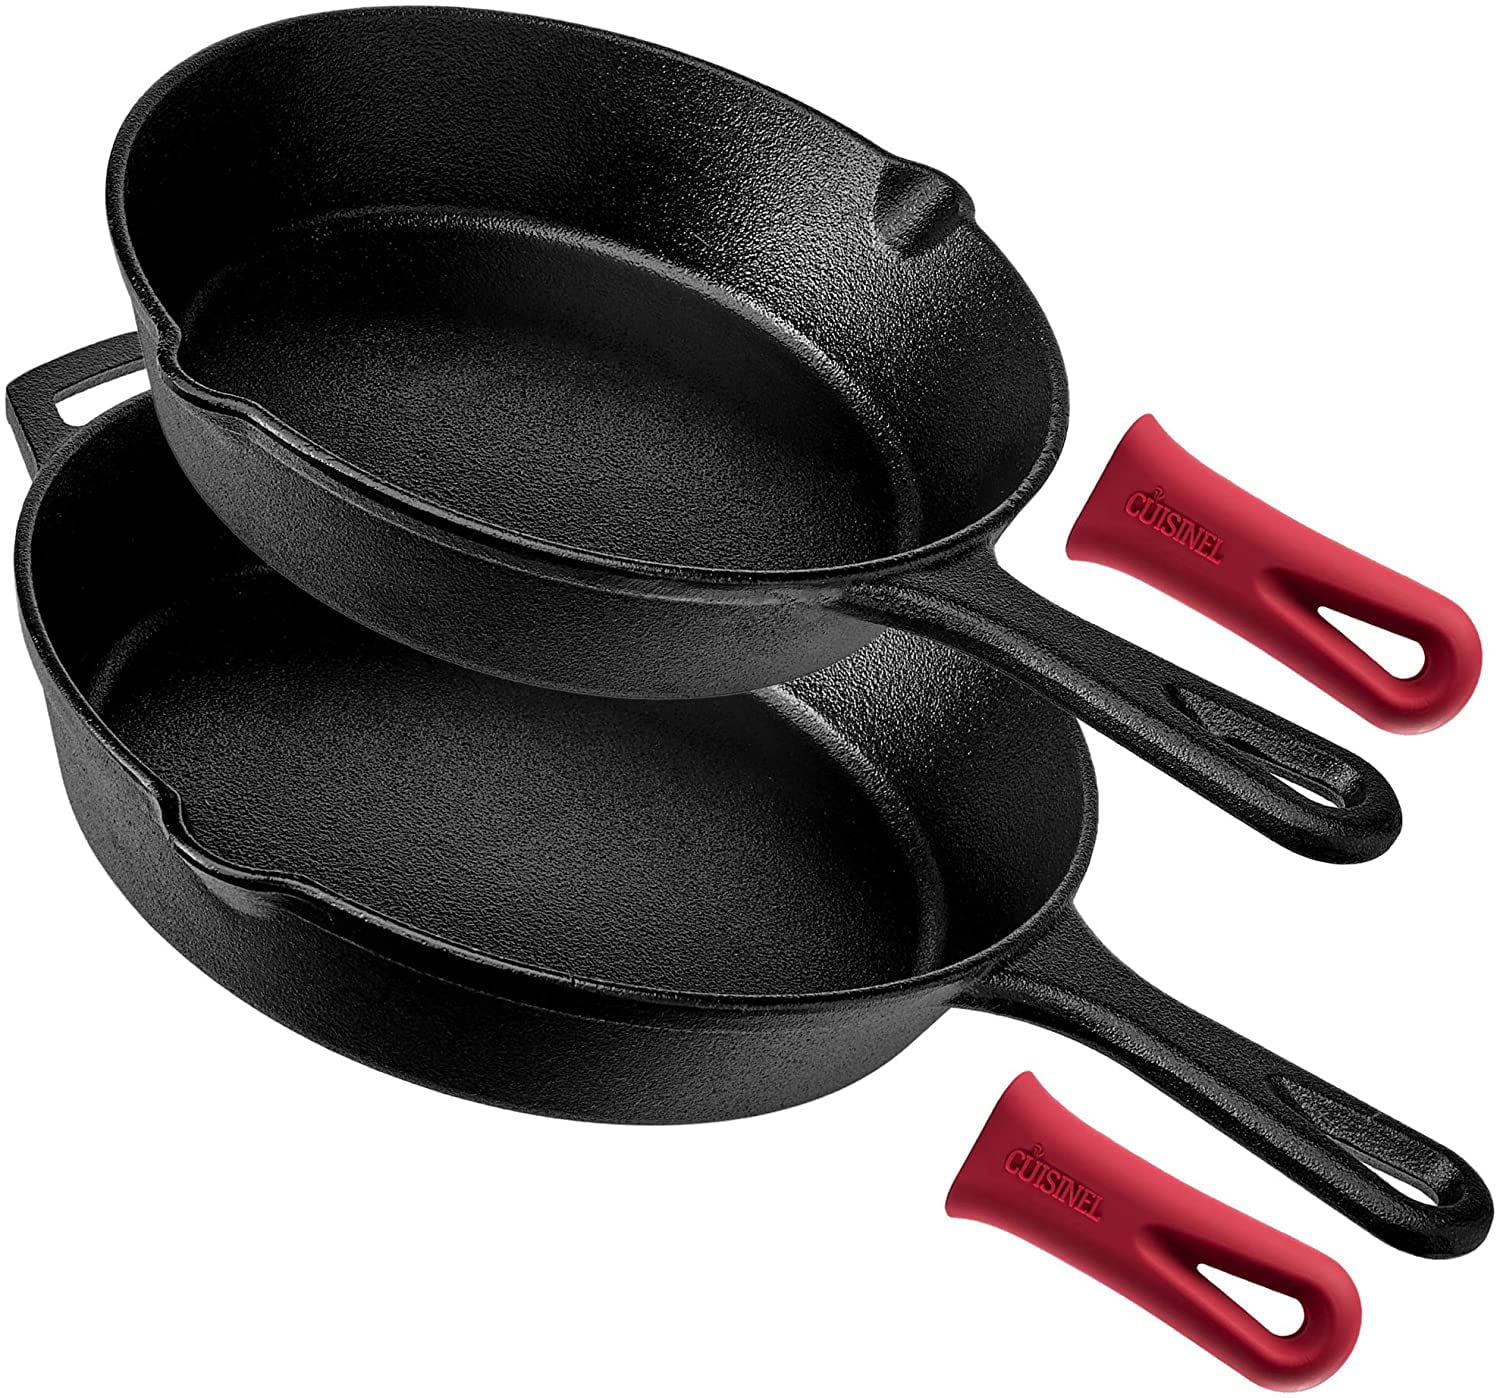 10/8/6 Inch Set Oven/Grill/Stovetop/Induction Pre-Seasoned Cast Iron Skillet 3-Piece Set 